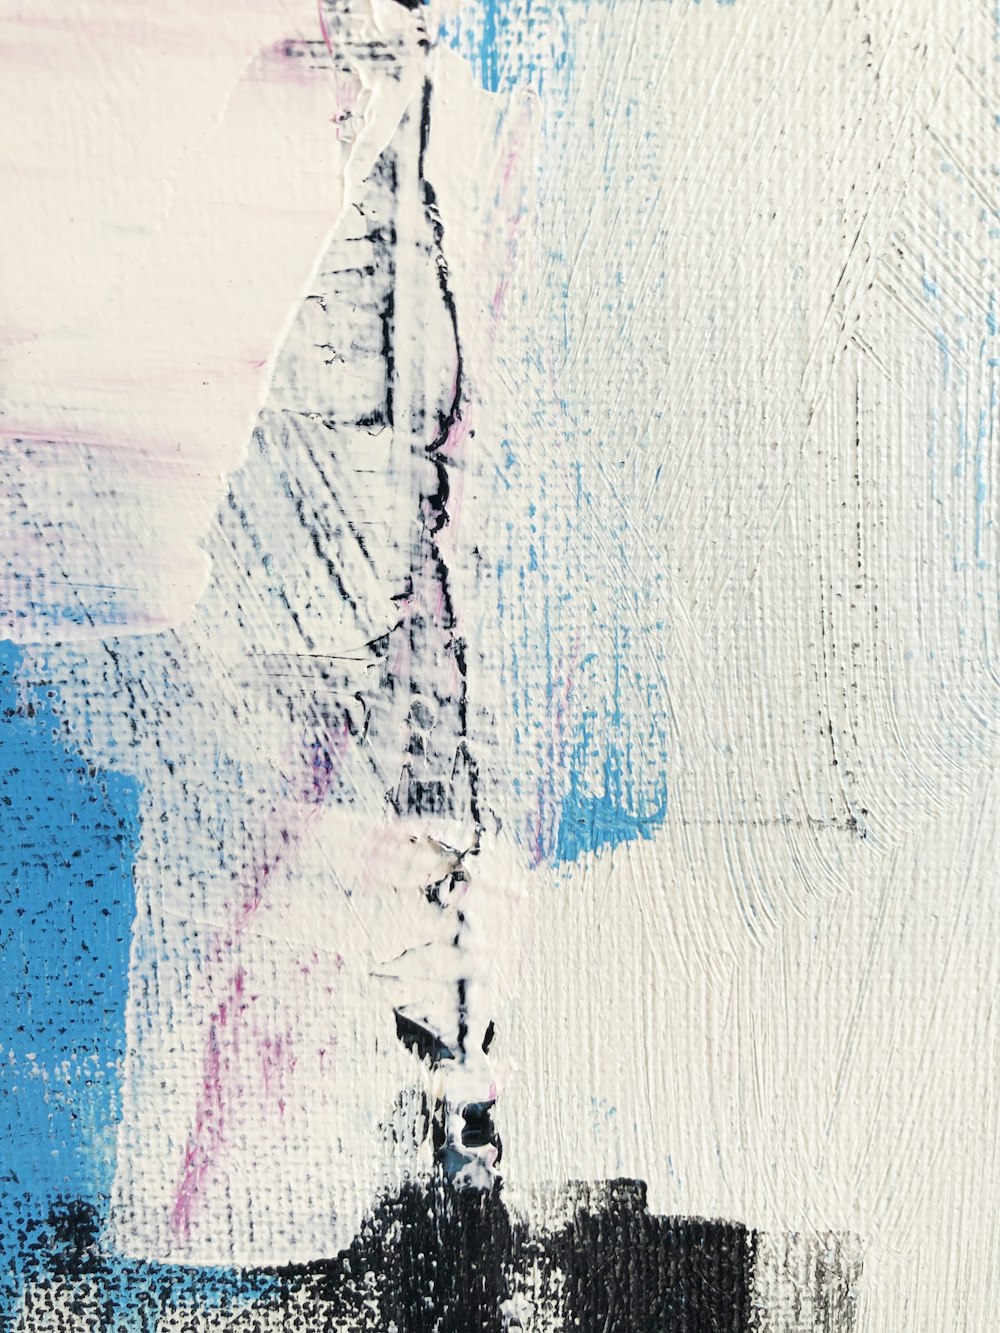 an abstract painting with blue, pink, and white colors